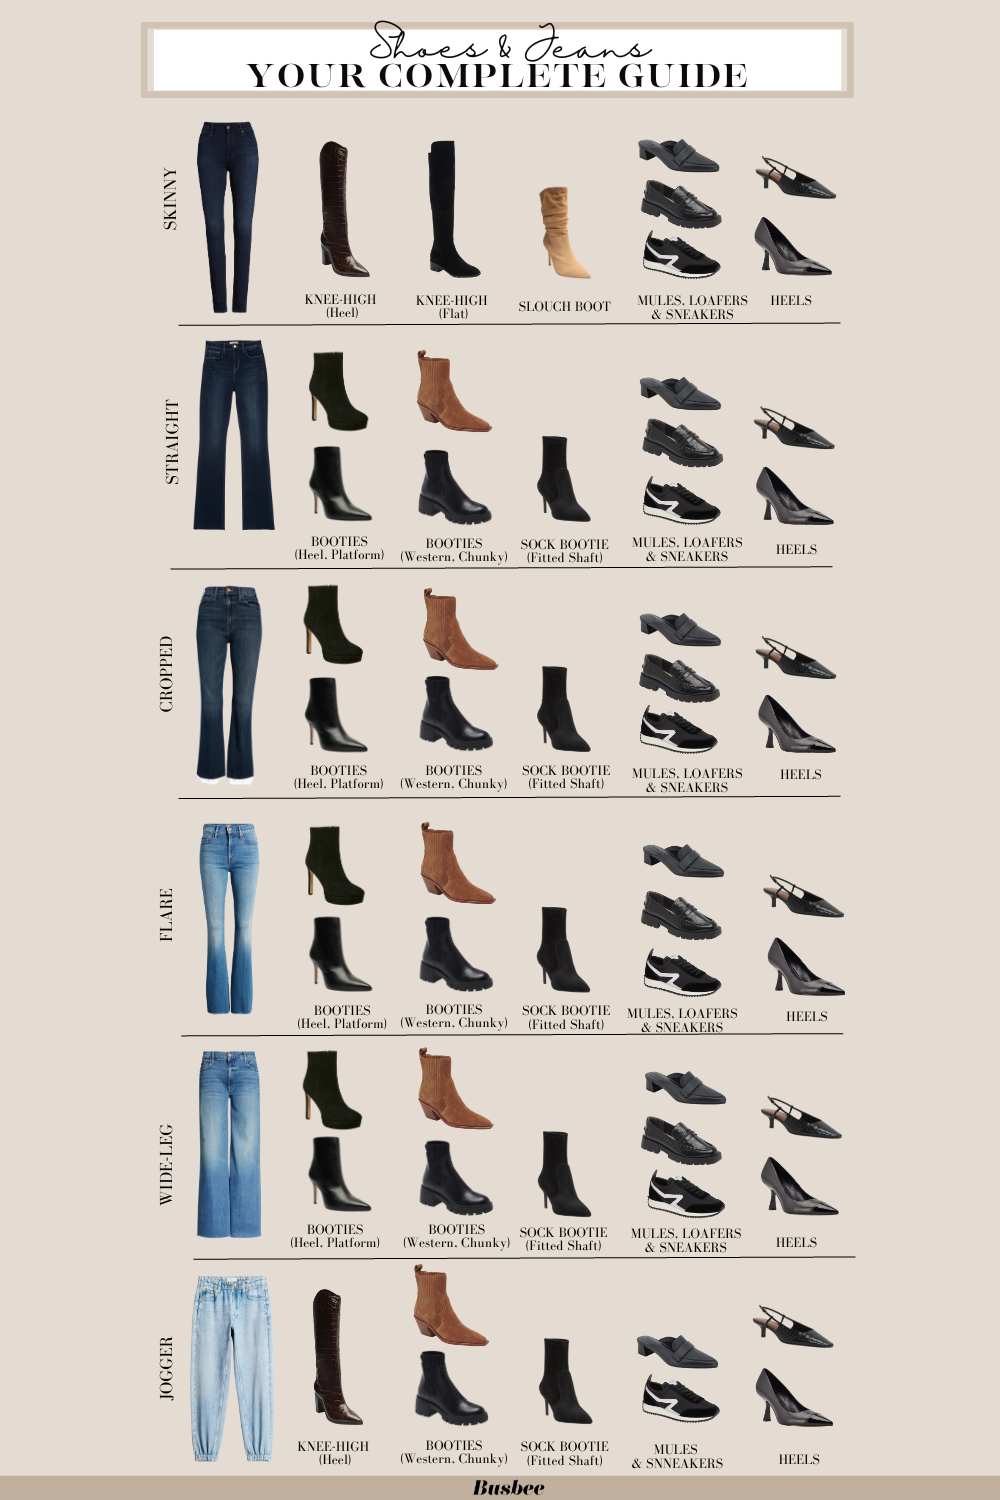 10 Best Shoes to Wear with Flare Jeans - Penny Pincher Fashion